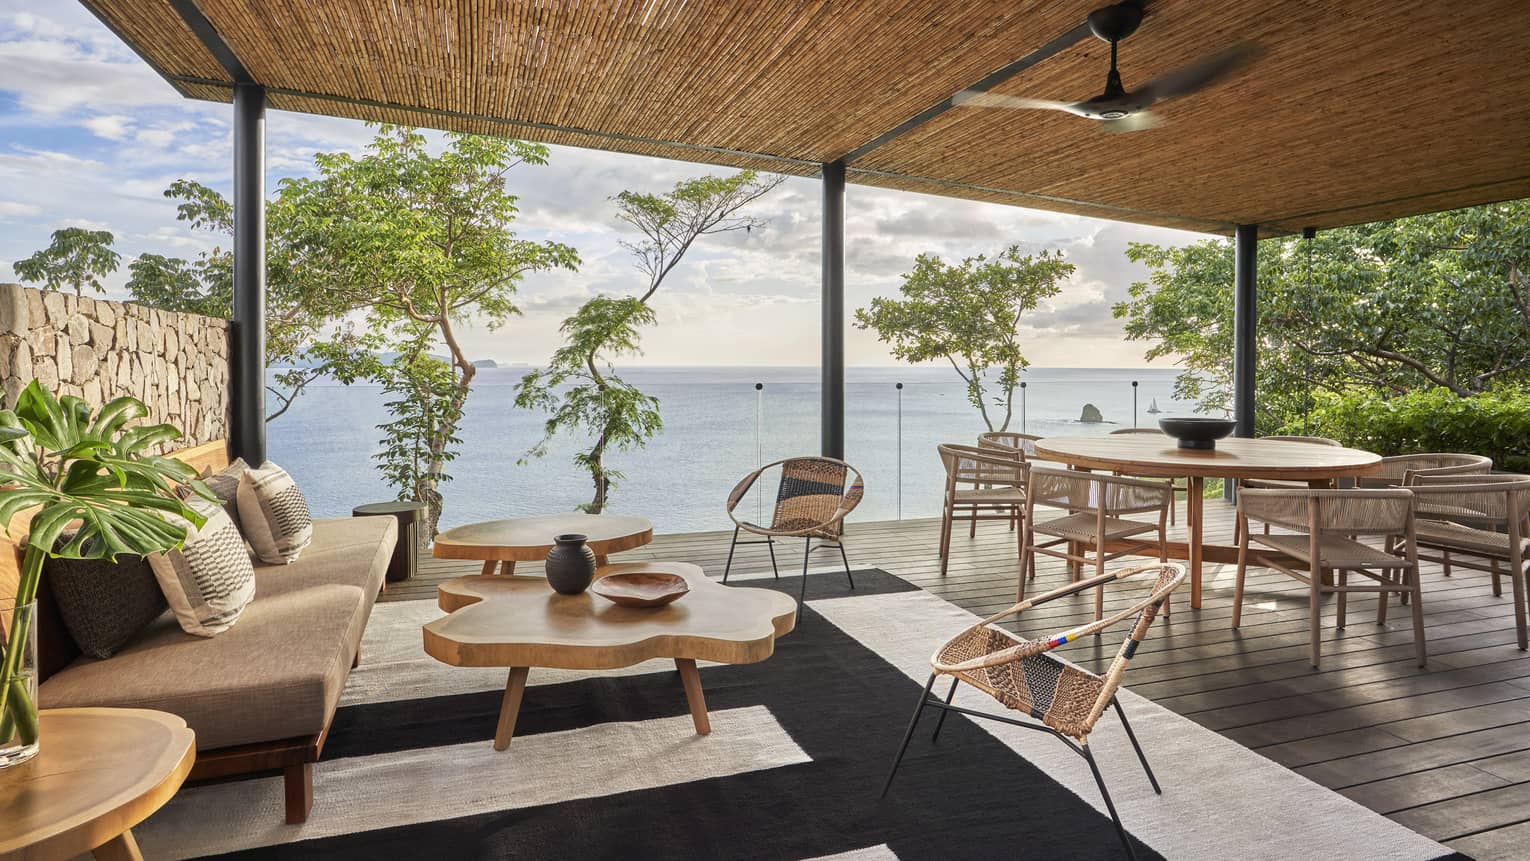 Covered outdoor wooden deck with dining table and contemporary lounge furniture overlooking the sea